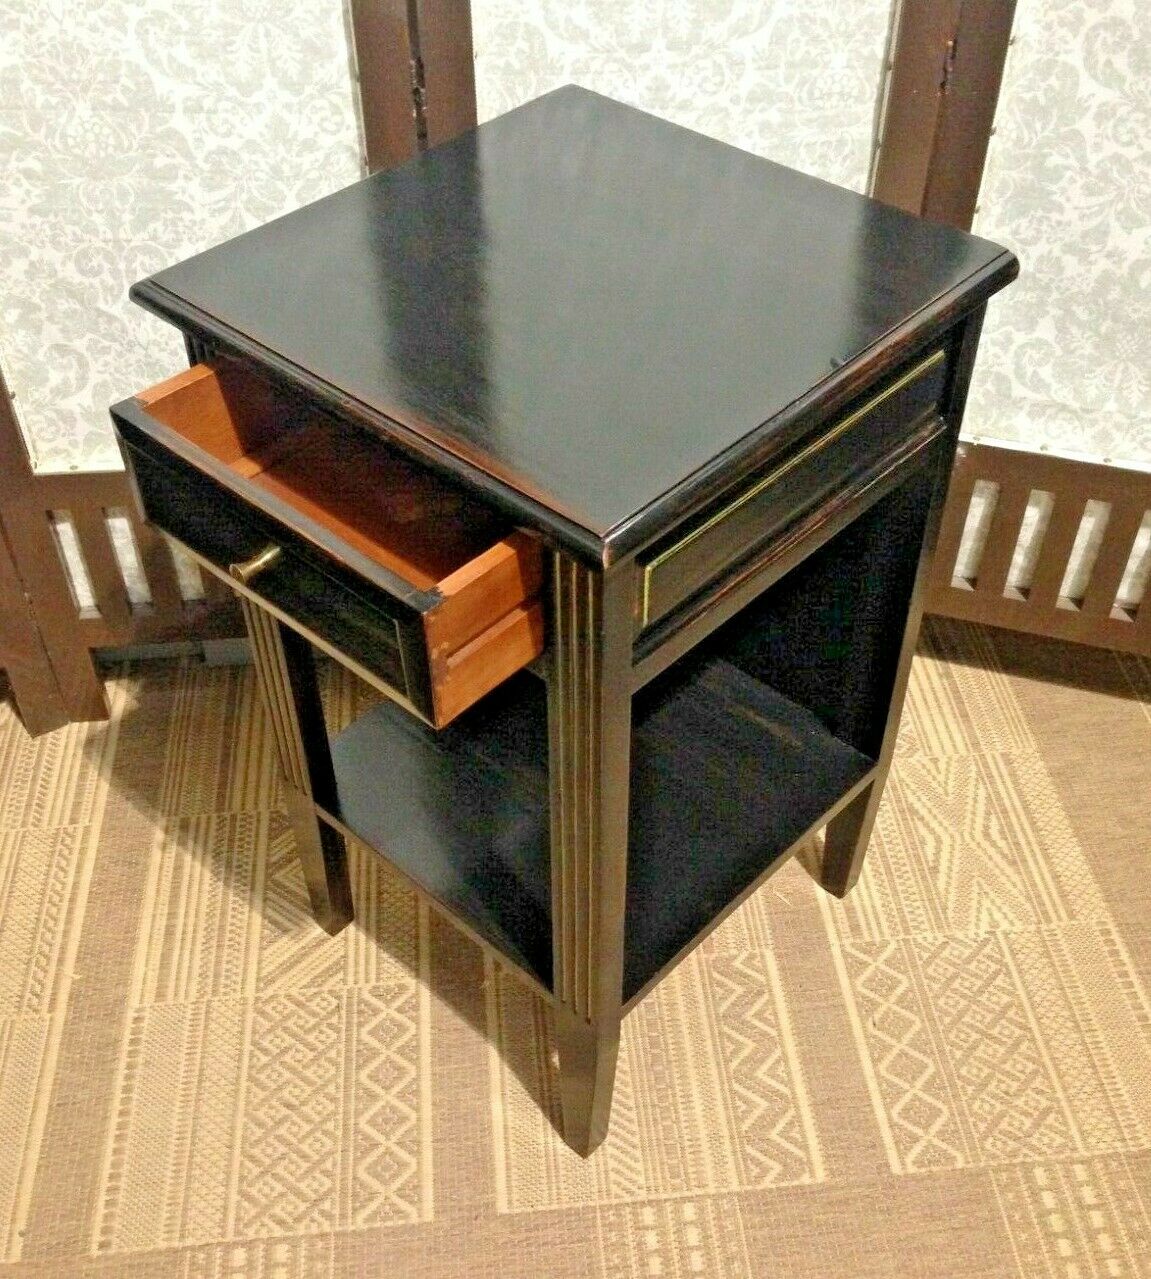 A Pair Of Vintage Empire Style Bedside Tables / Pair Of Lamp Tables